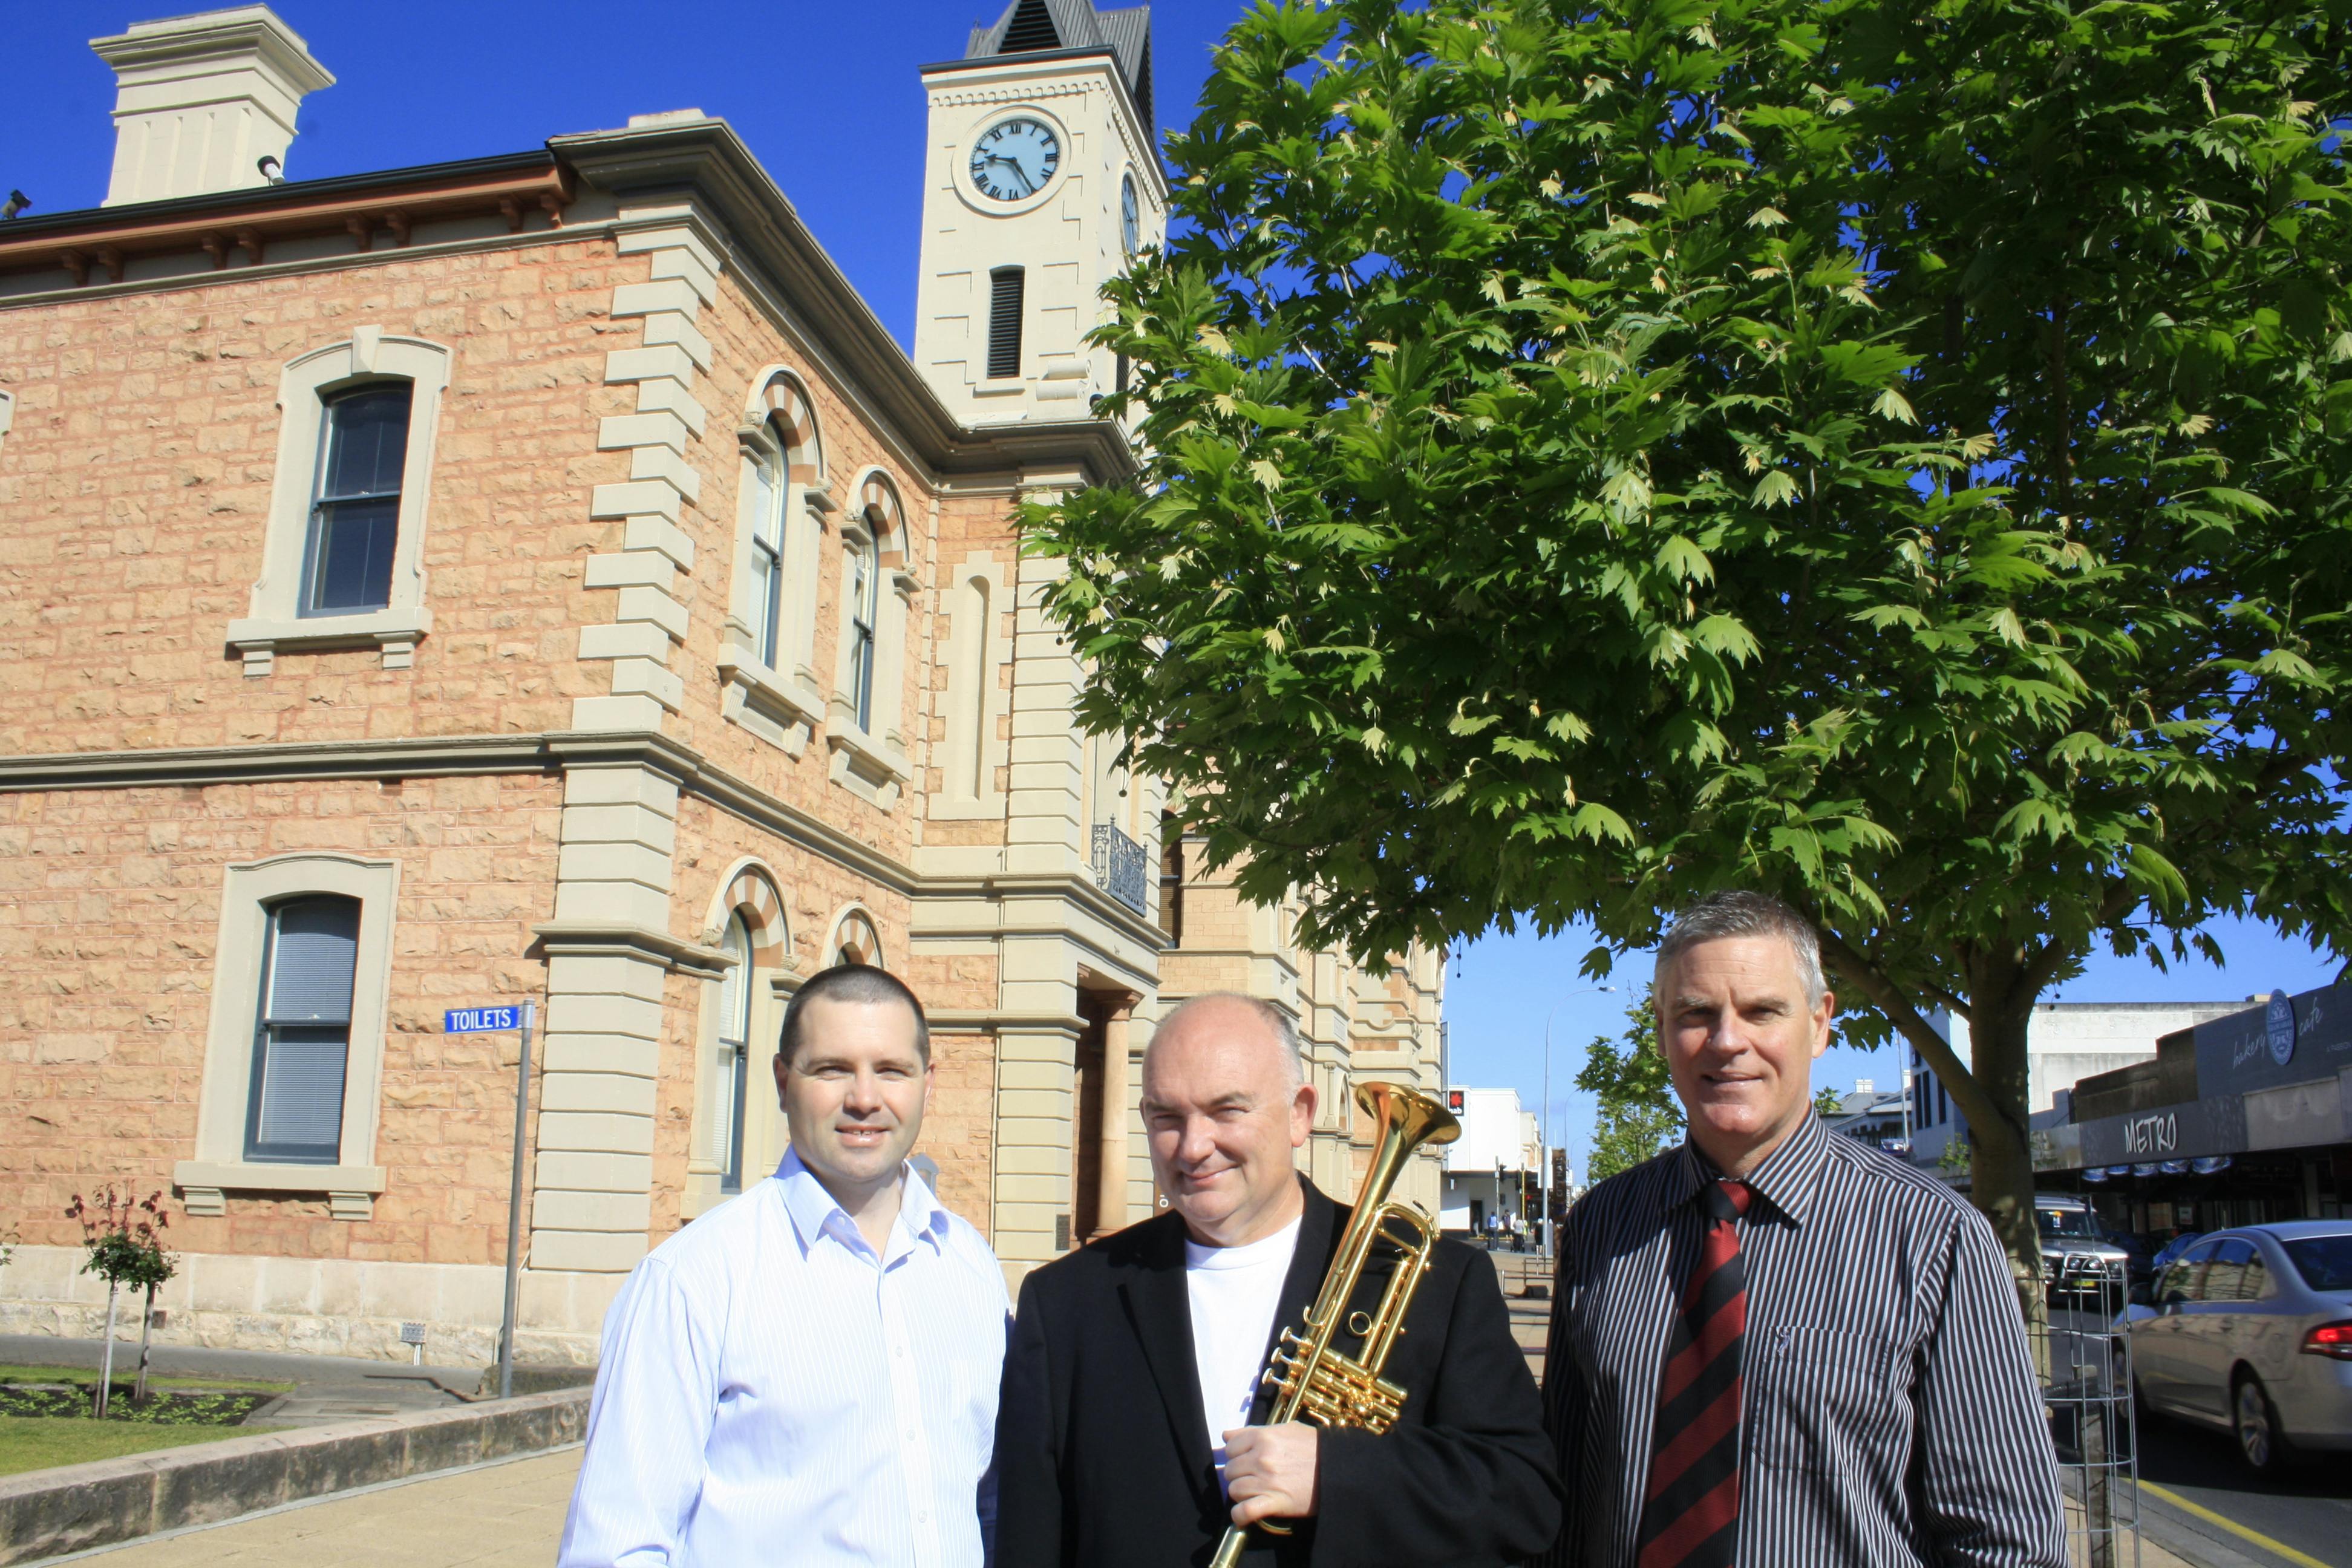 City of Mount Gambier Mayor, Steve Perryman with James Morrison and Mark Mc Shane outside the Old Town Hall. Photo Credit: The Border Watch